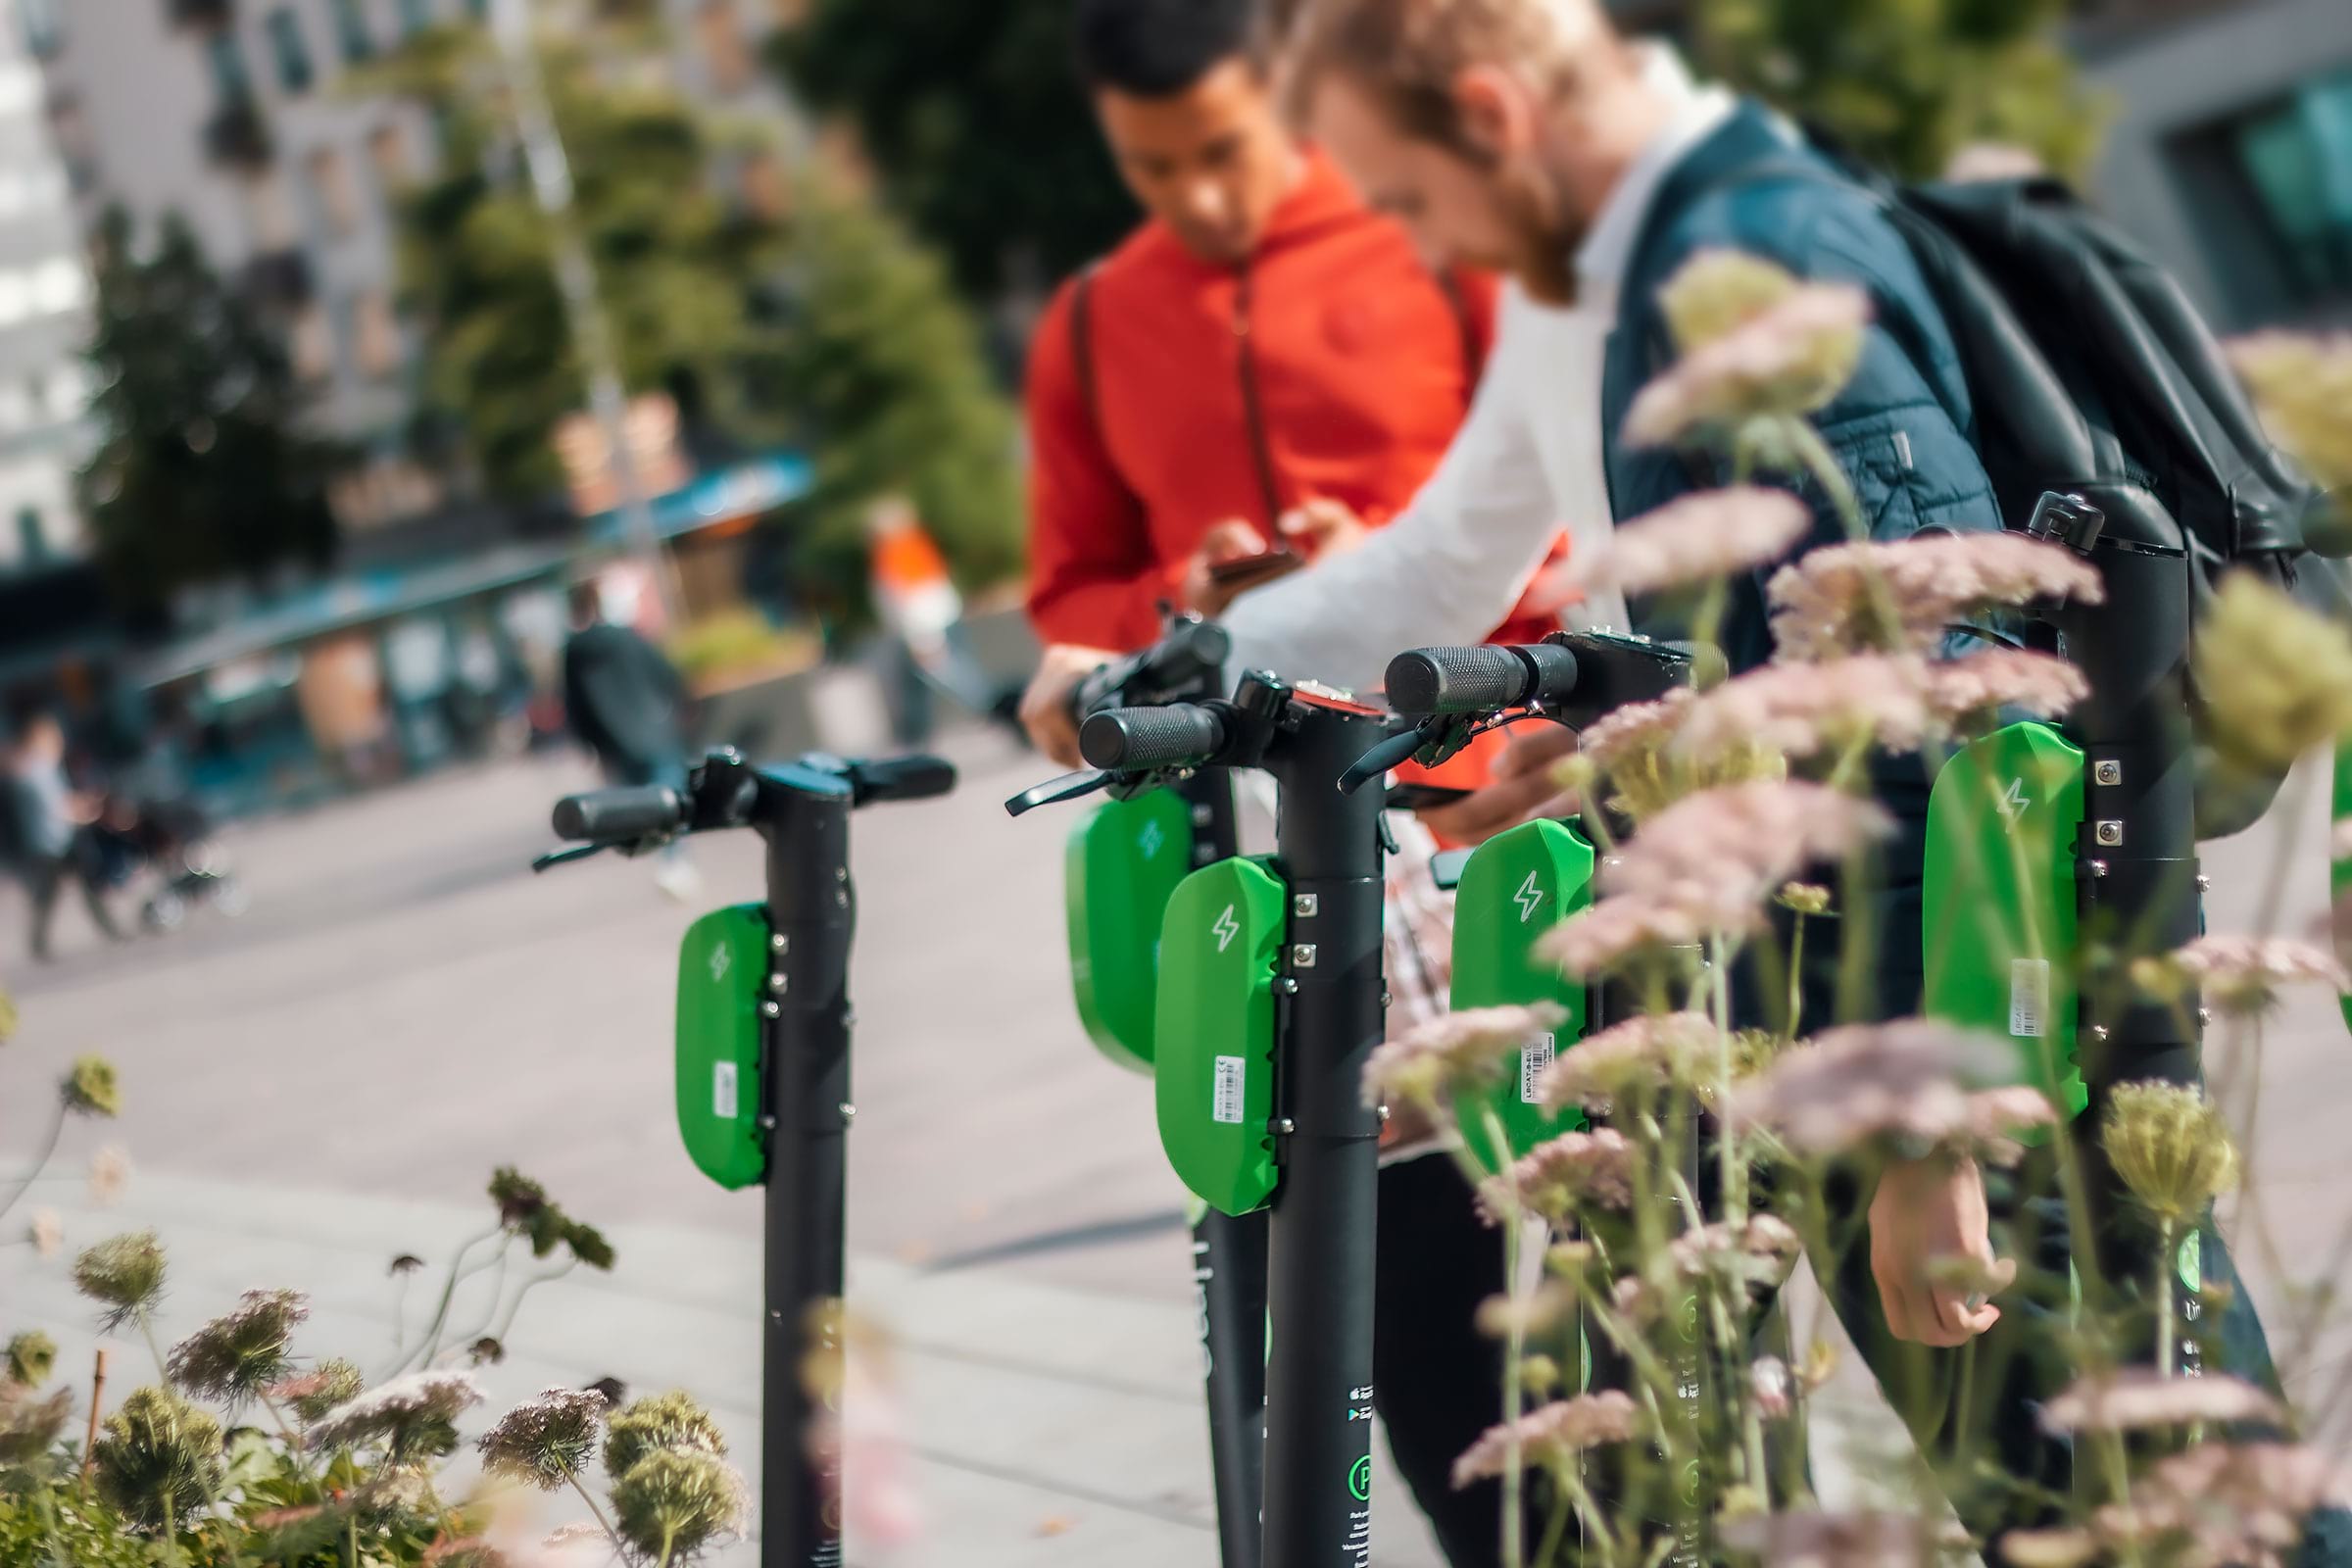 Getting around in Malmö - to an electric scooter